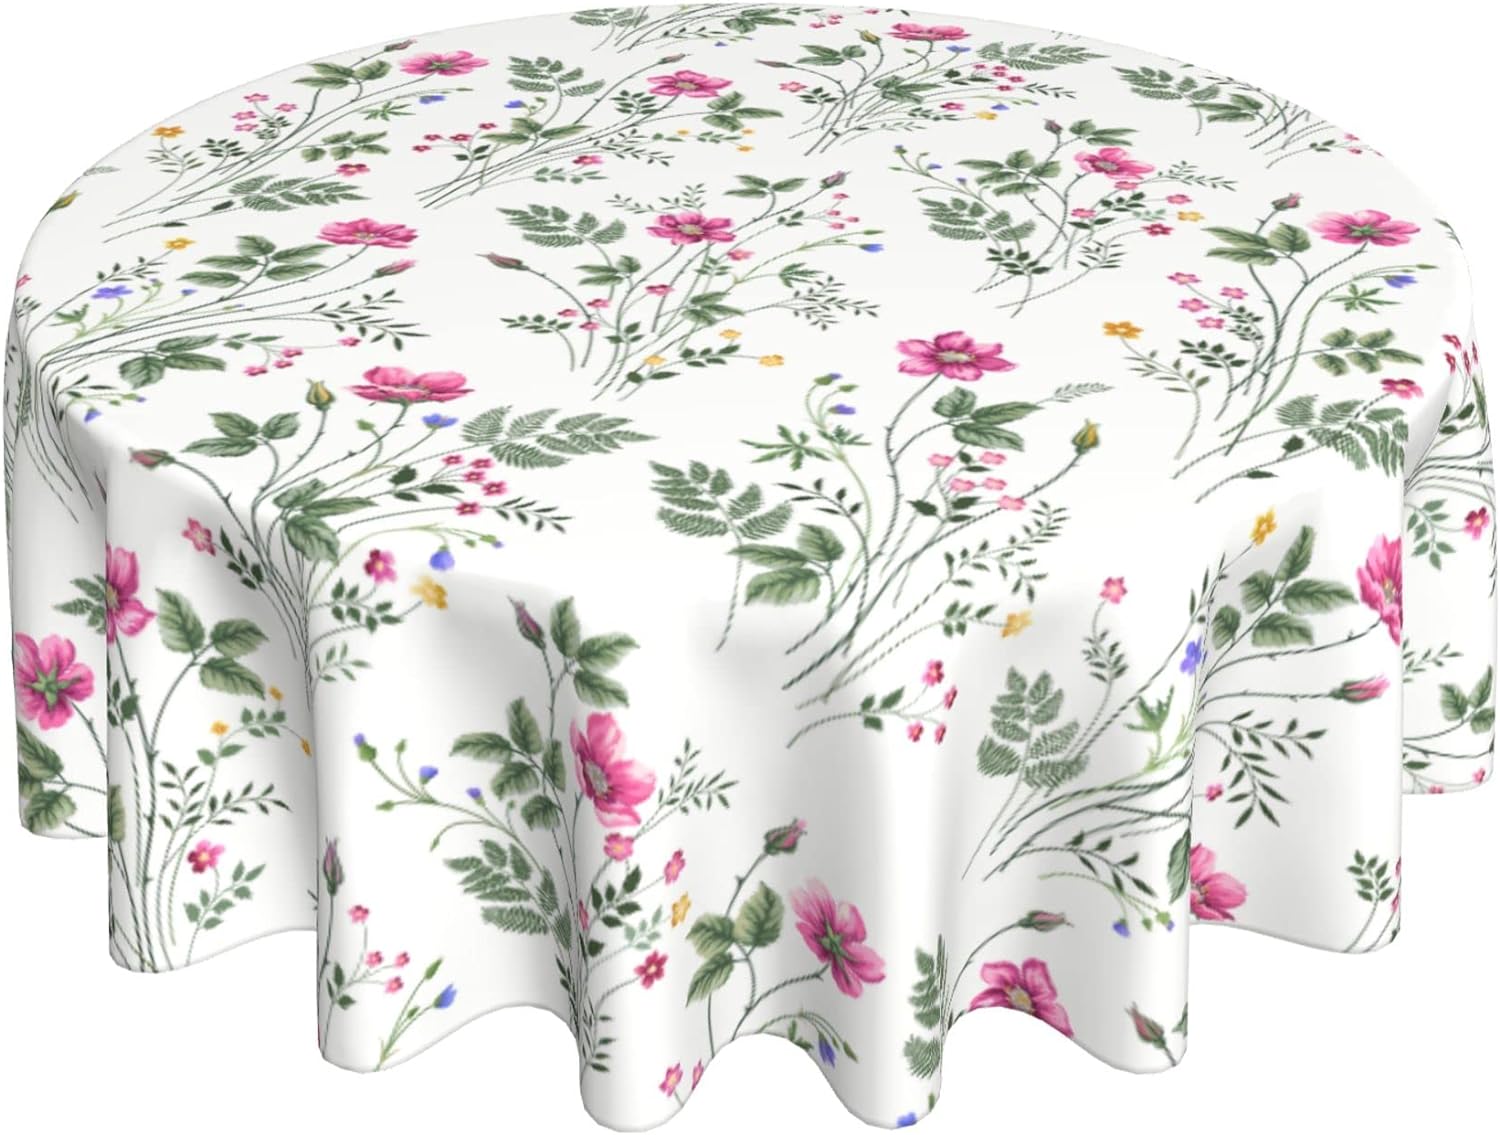 ABSOP Floral Tablecloth,Spring Round Tablecloth,Red Green Flower Table Cloth Round 60 Inch Waterproof Tablecloth for Dining Room Kitchen Table Picnic Party Indoor Outdoor Patio Decoration